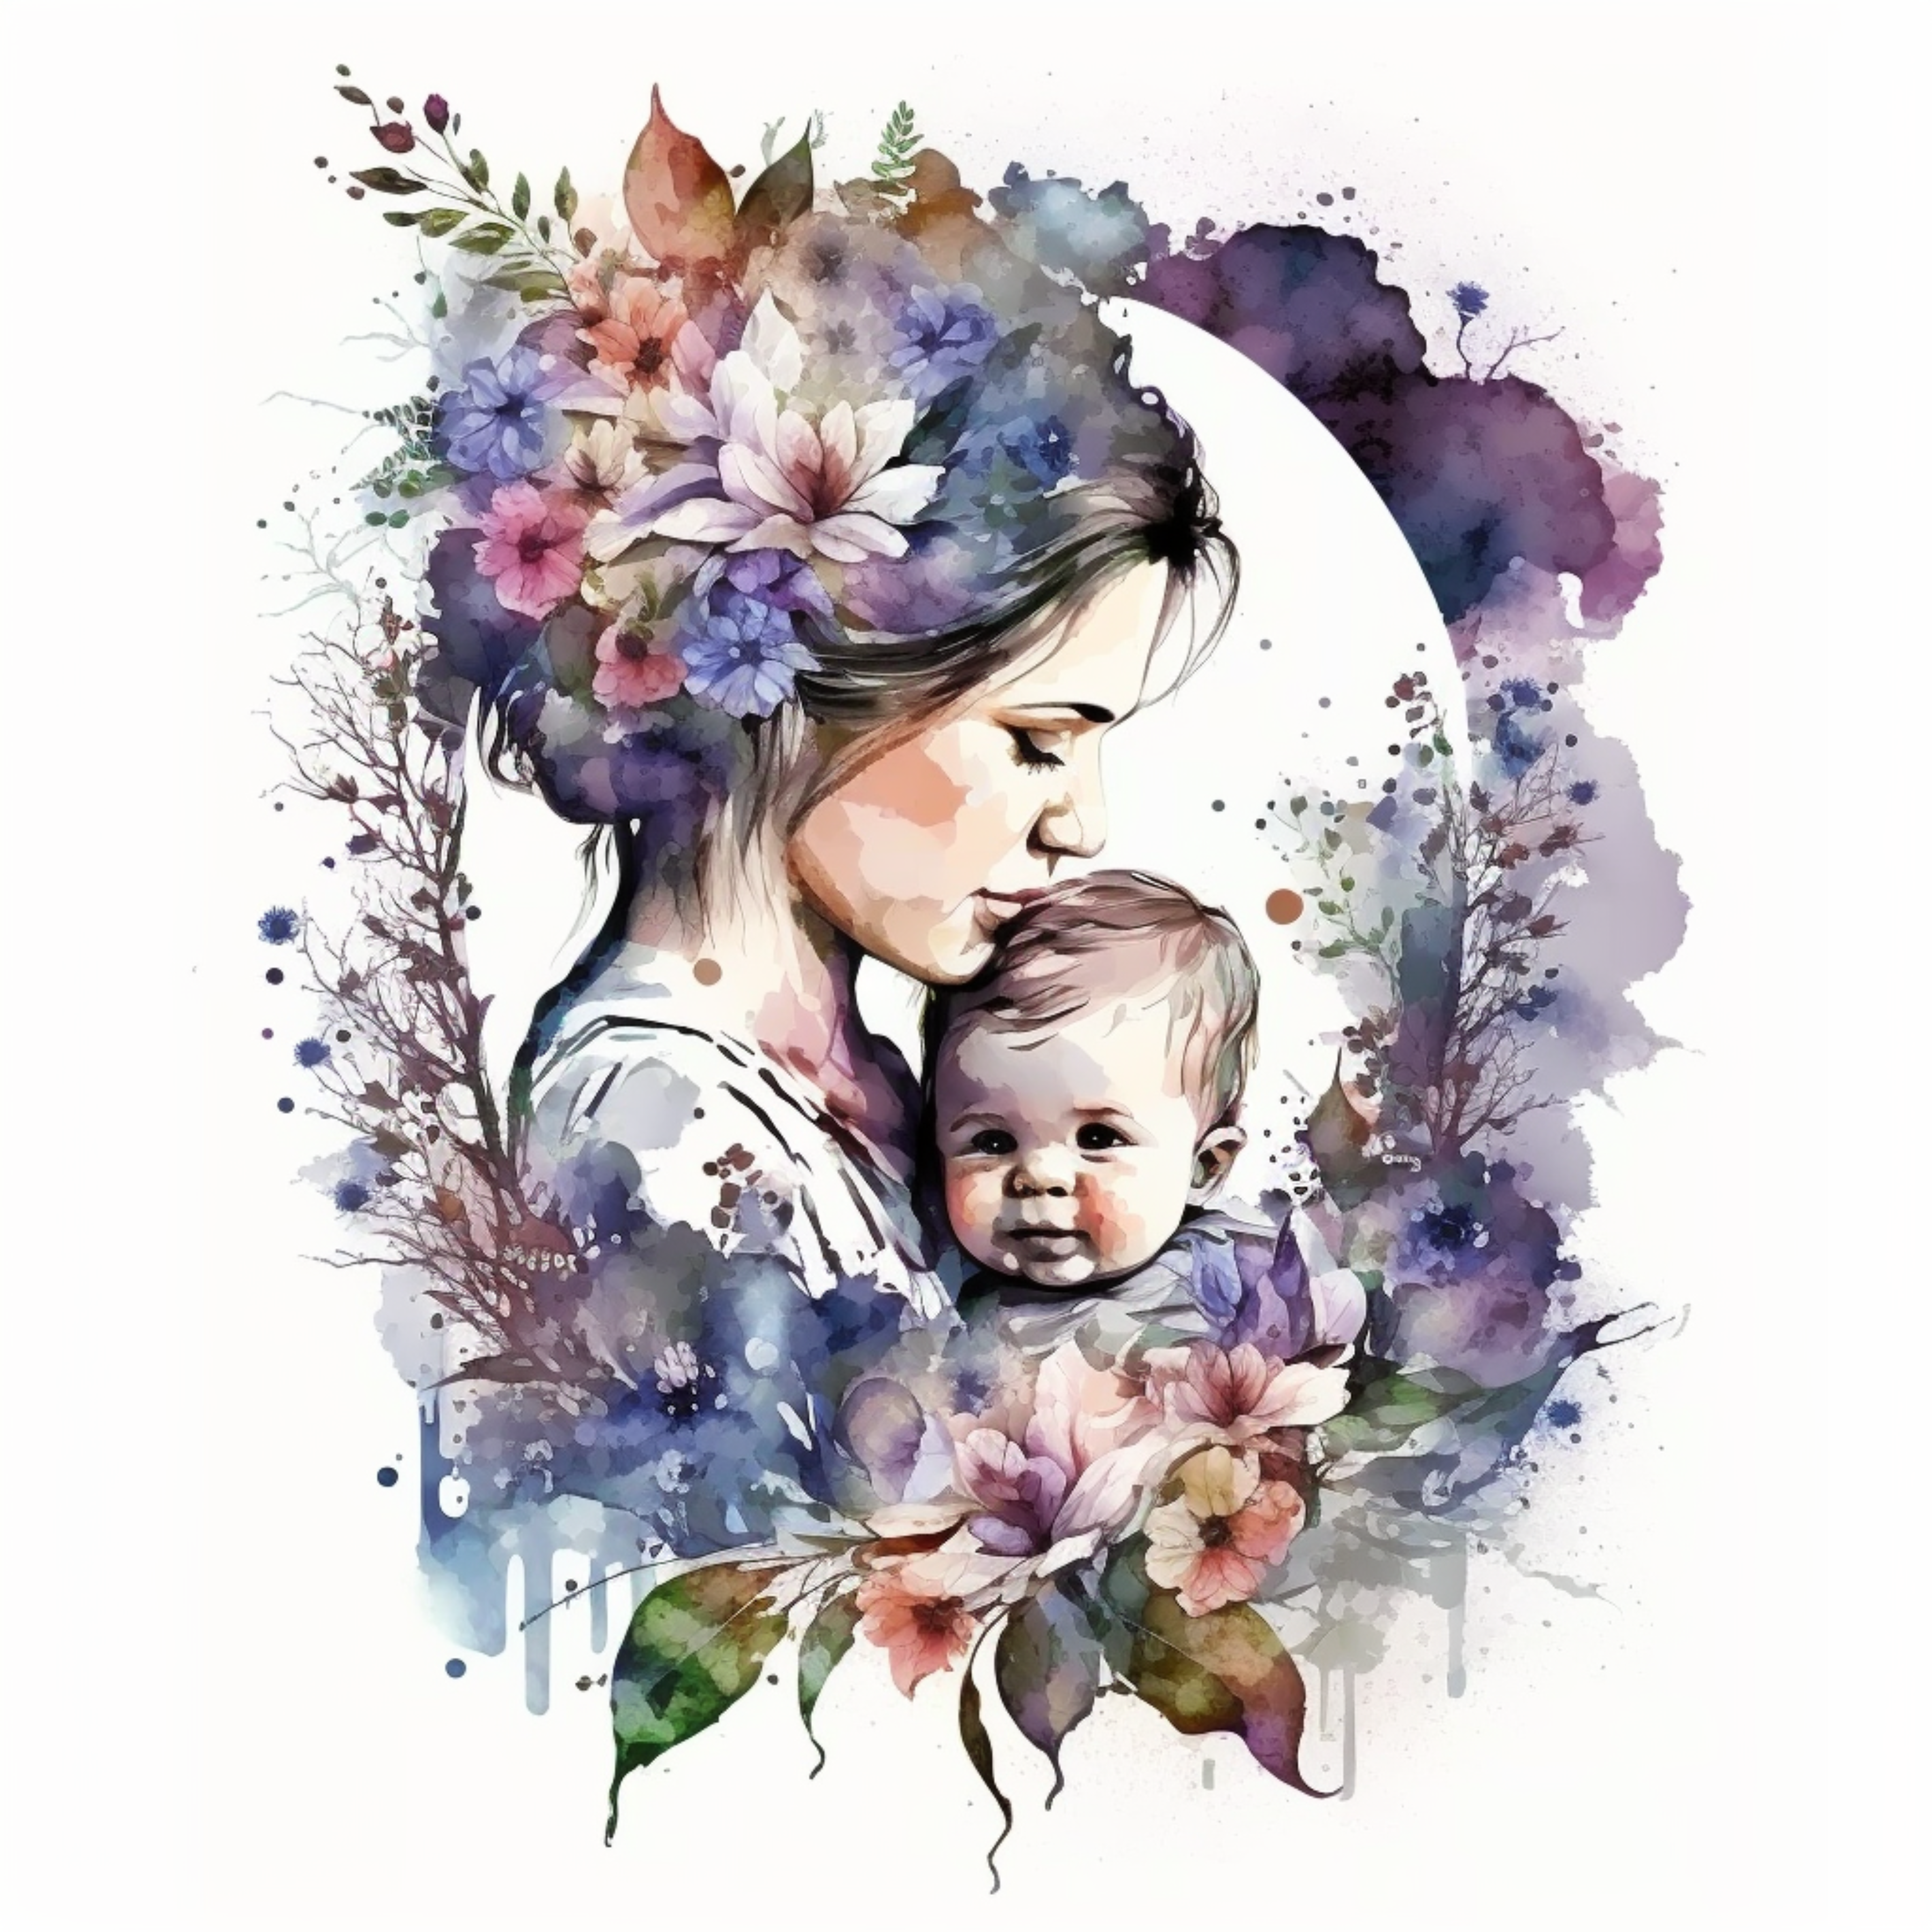 mother and child painting